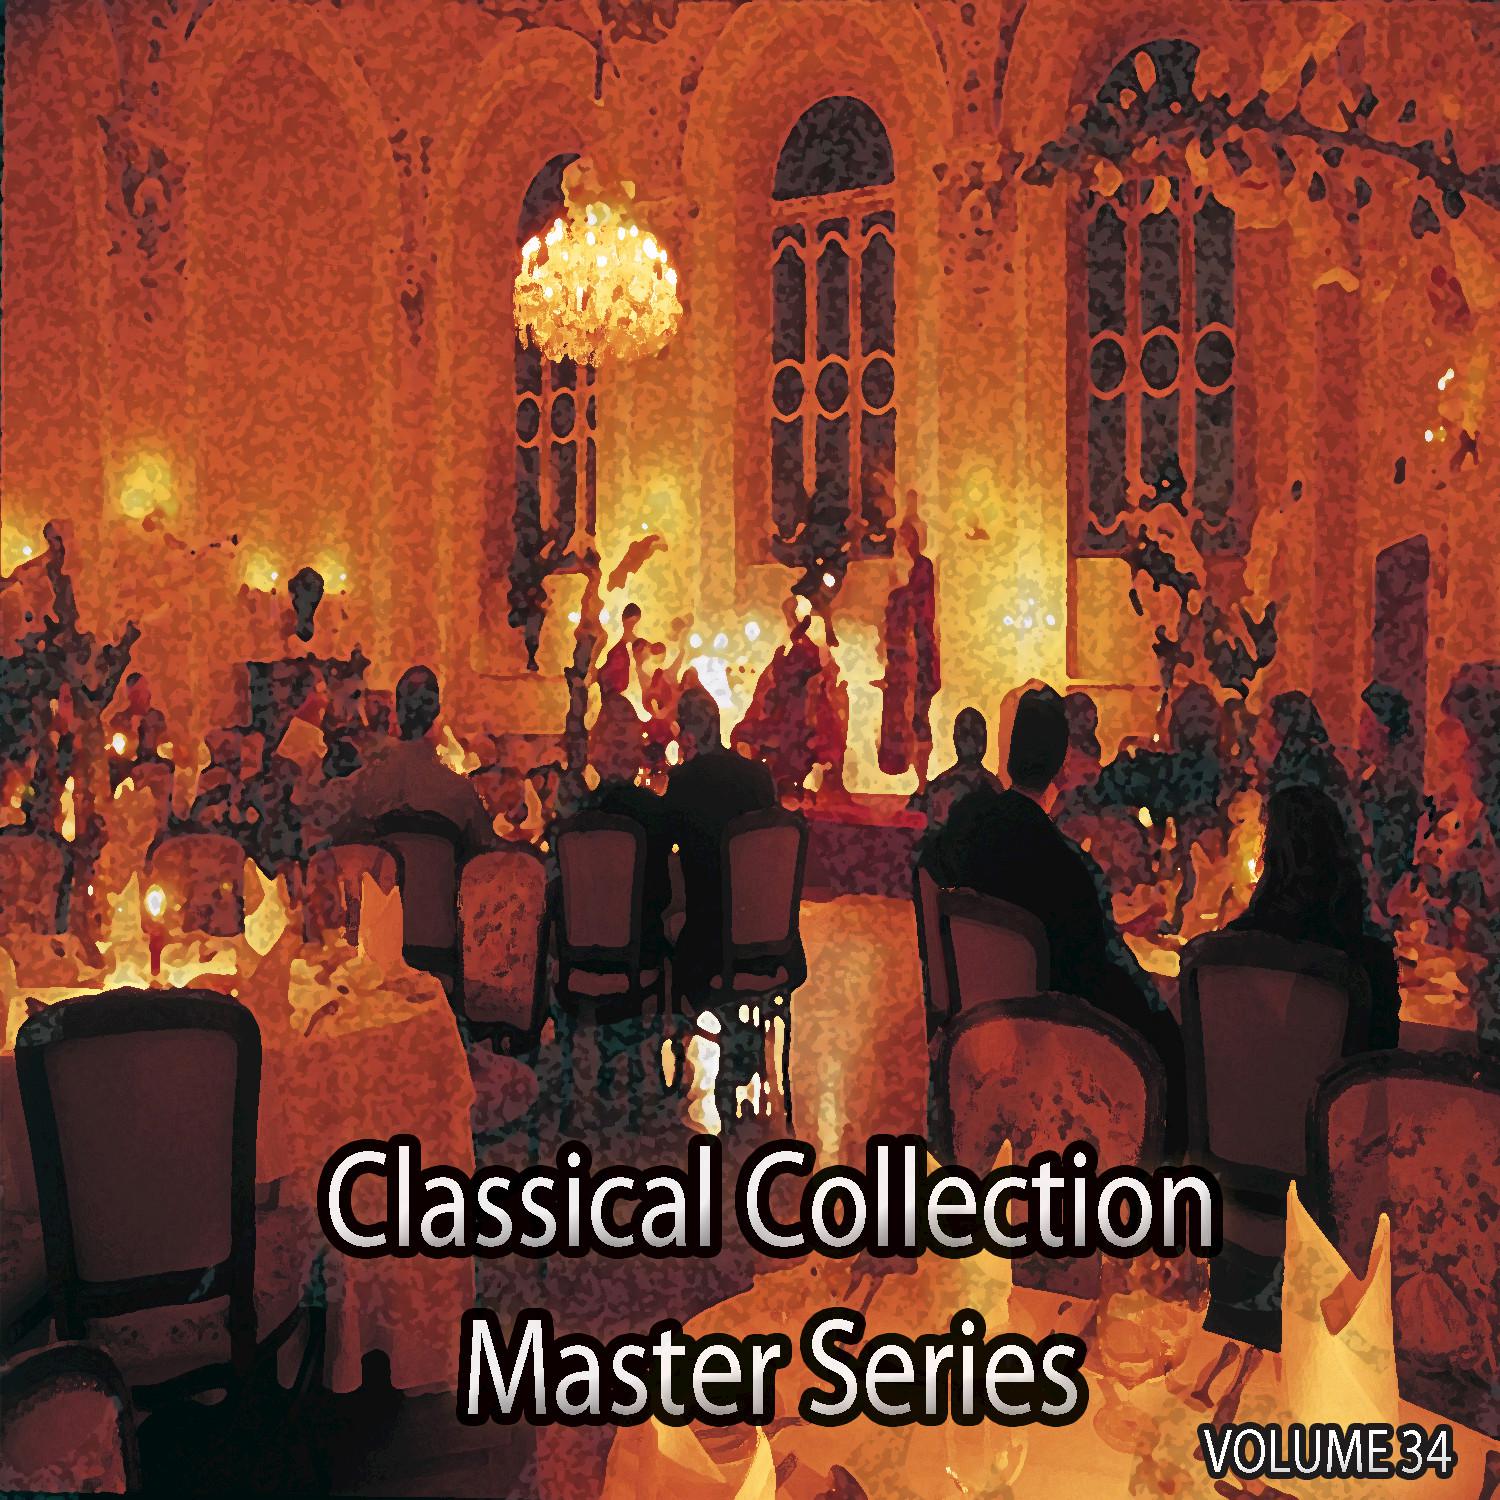 Concerto for Violin and Orchestra No. 1 in D, Op. 19: III. Moderato, Pt. 1